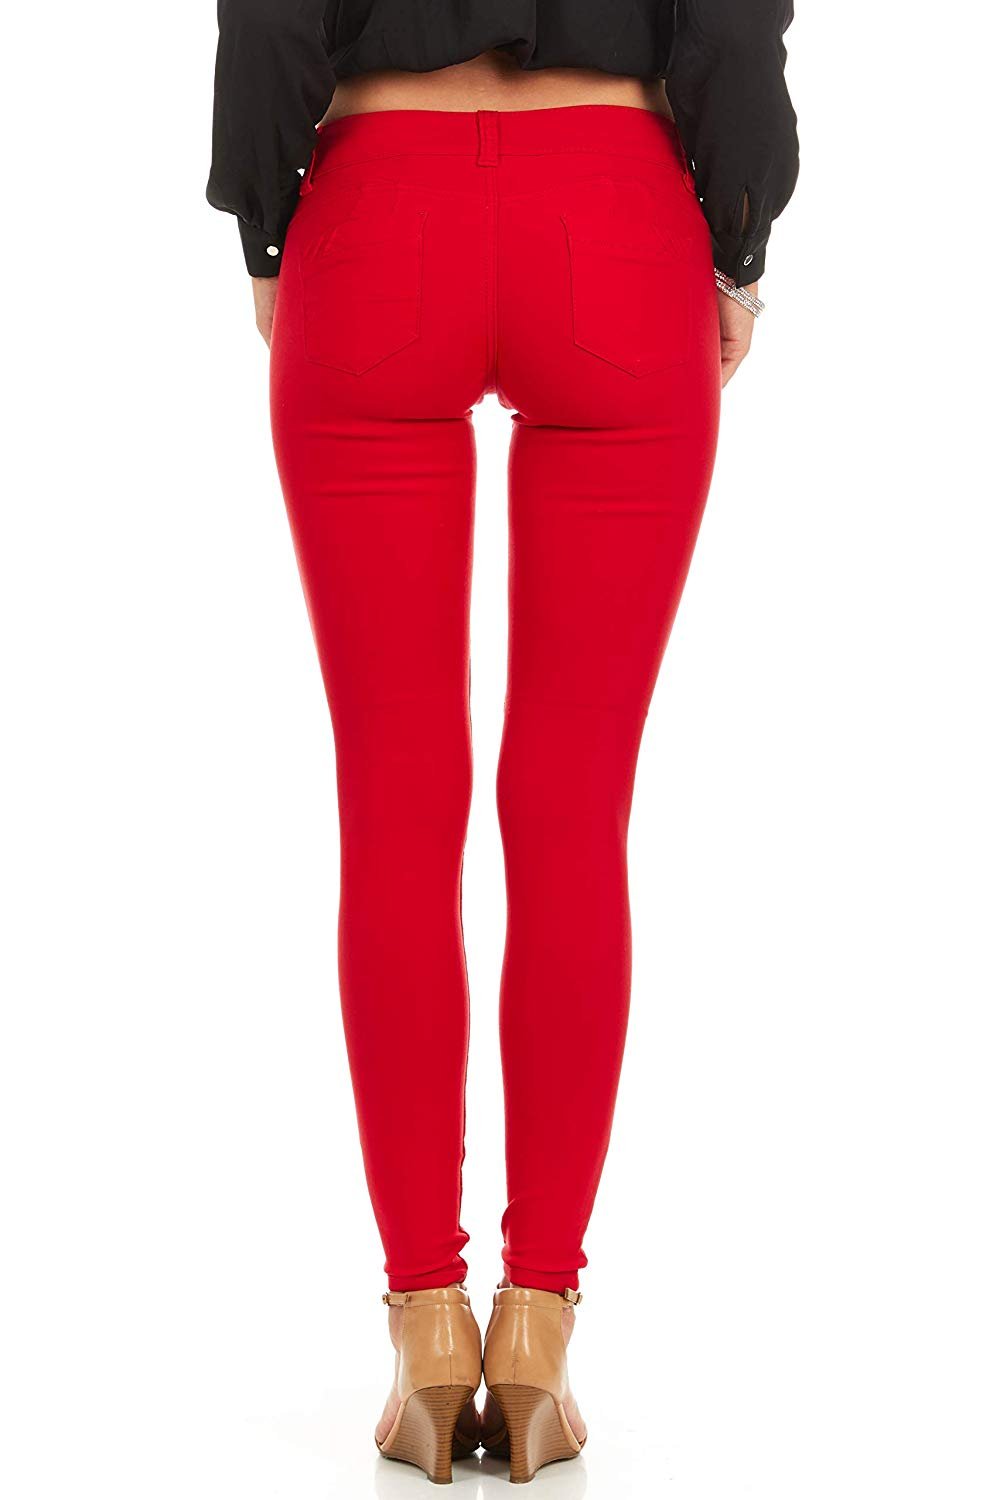 Cute Teen Girl Denim Hyper Stretch Skinny Jeans Colorful Junior/Plus Sizes 14W Candy Red - image 2 of 7